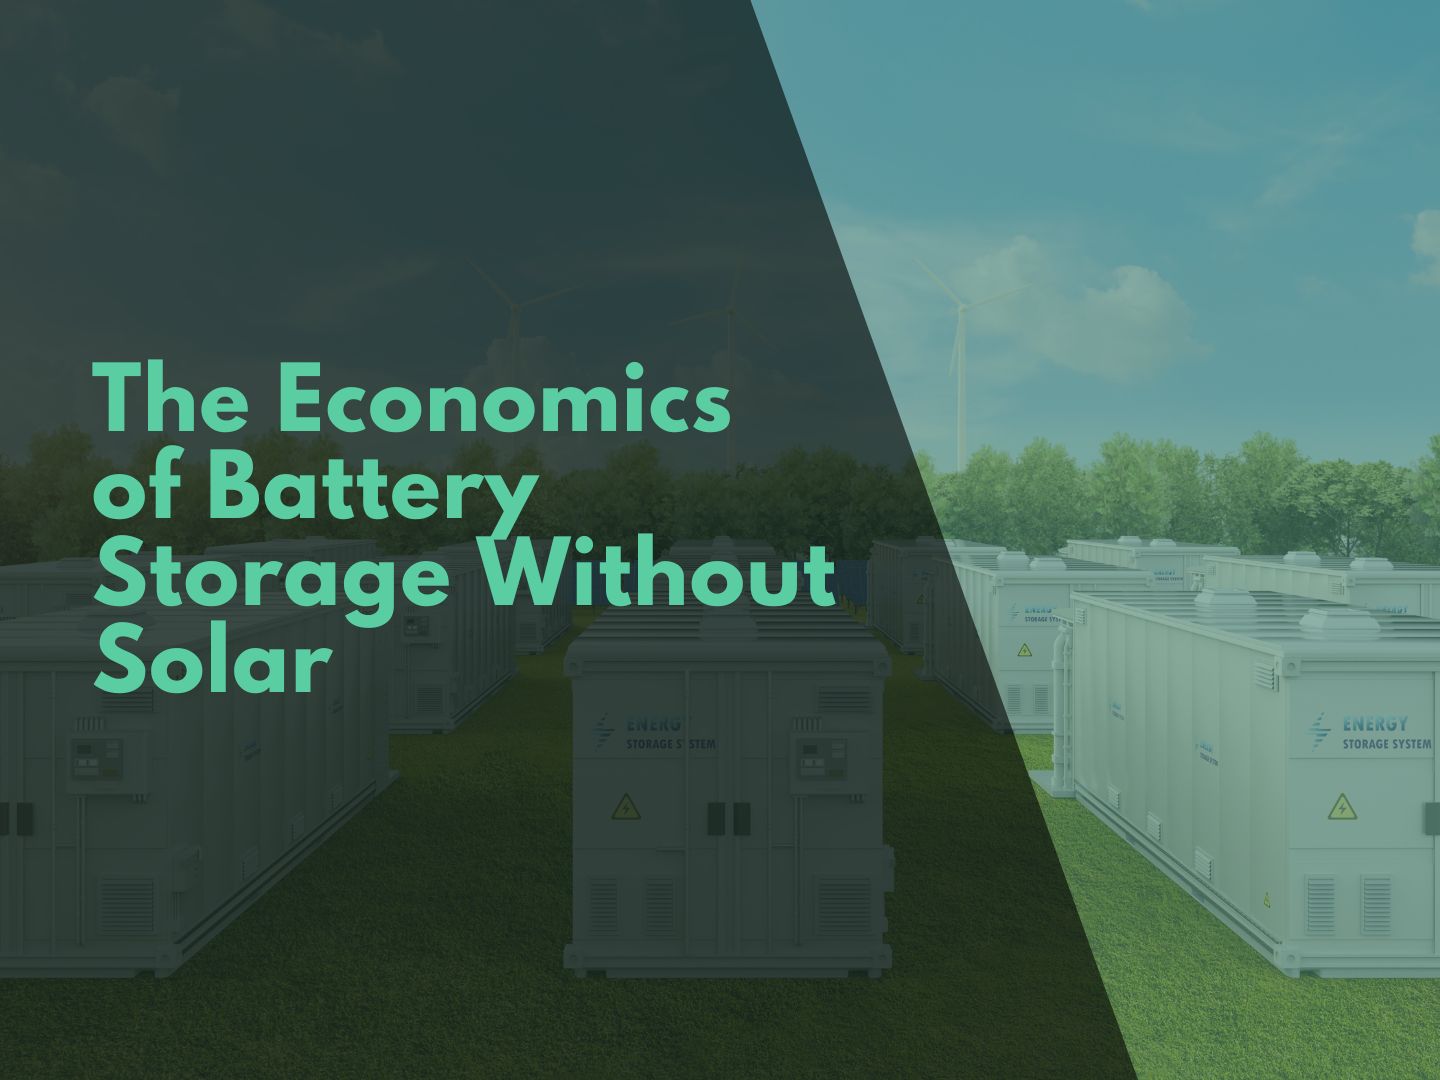 The Economics of Battery Storage Without Solar